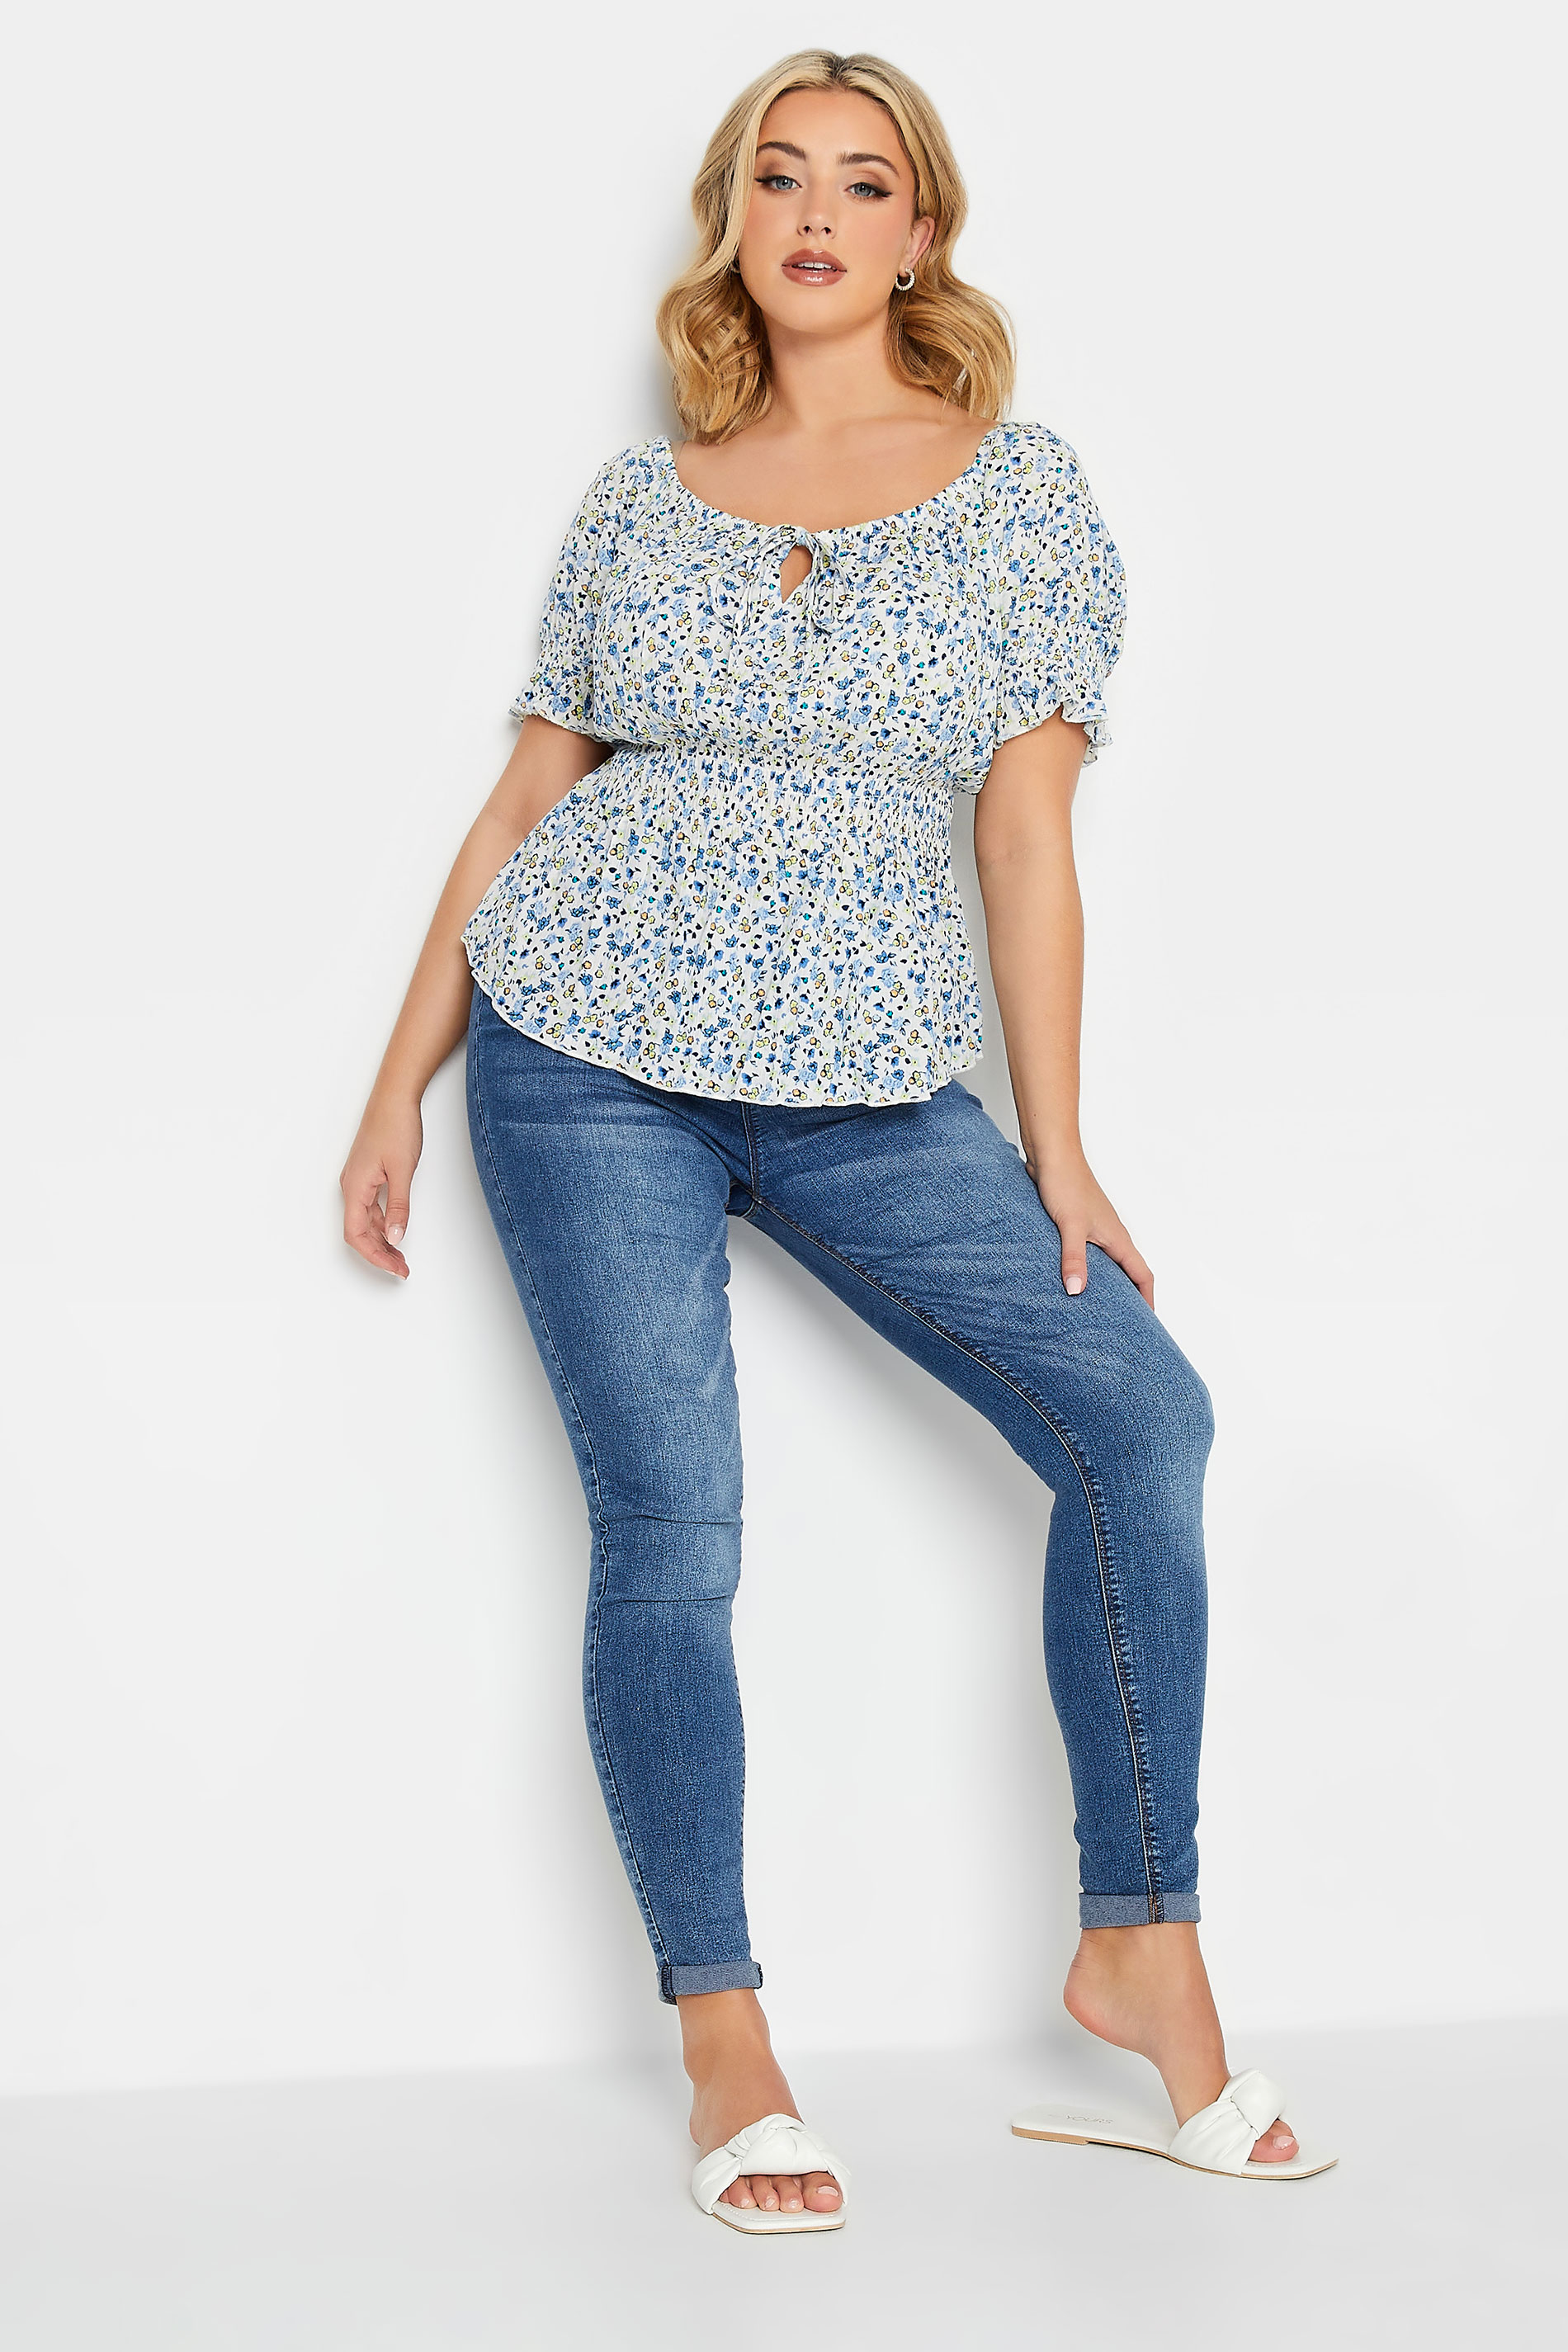 YOURS PETITE Plus Size Curve White & Blue Floral Bardot Top | Yours Clothing  2